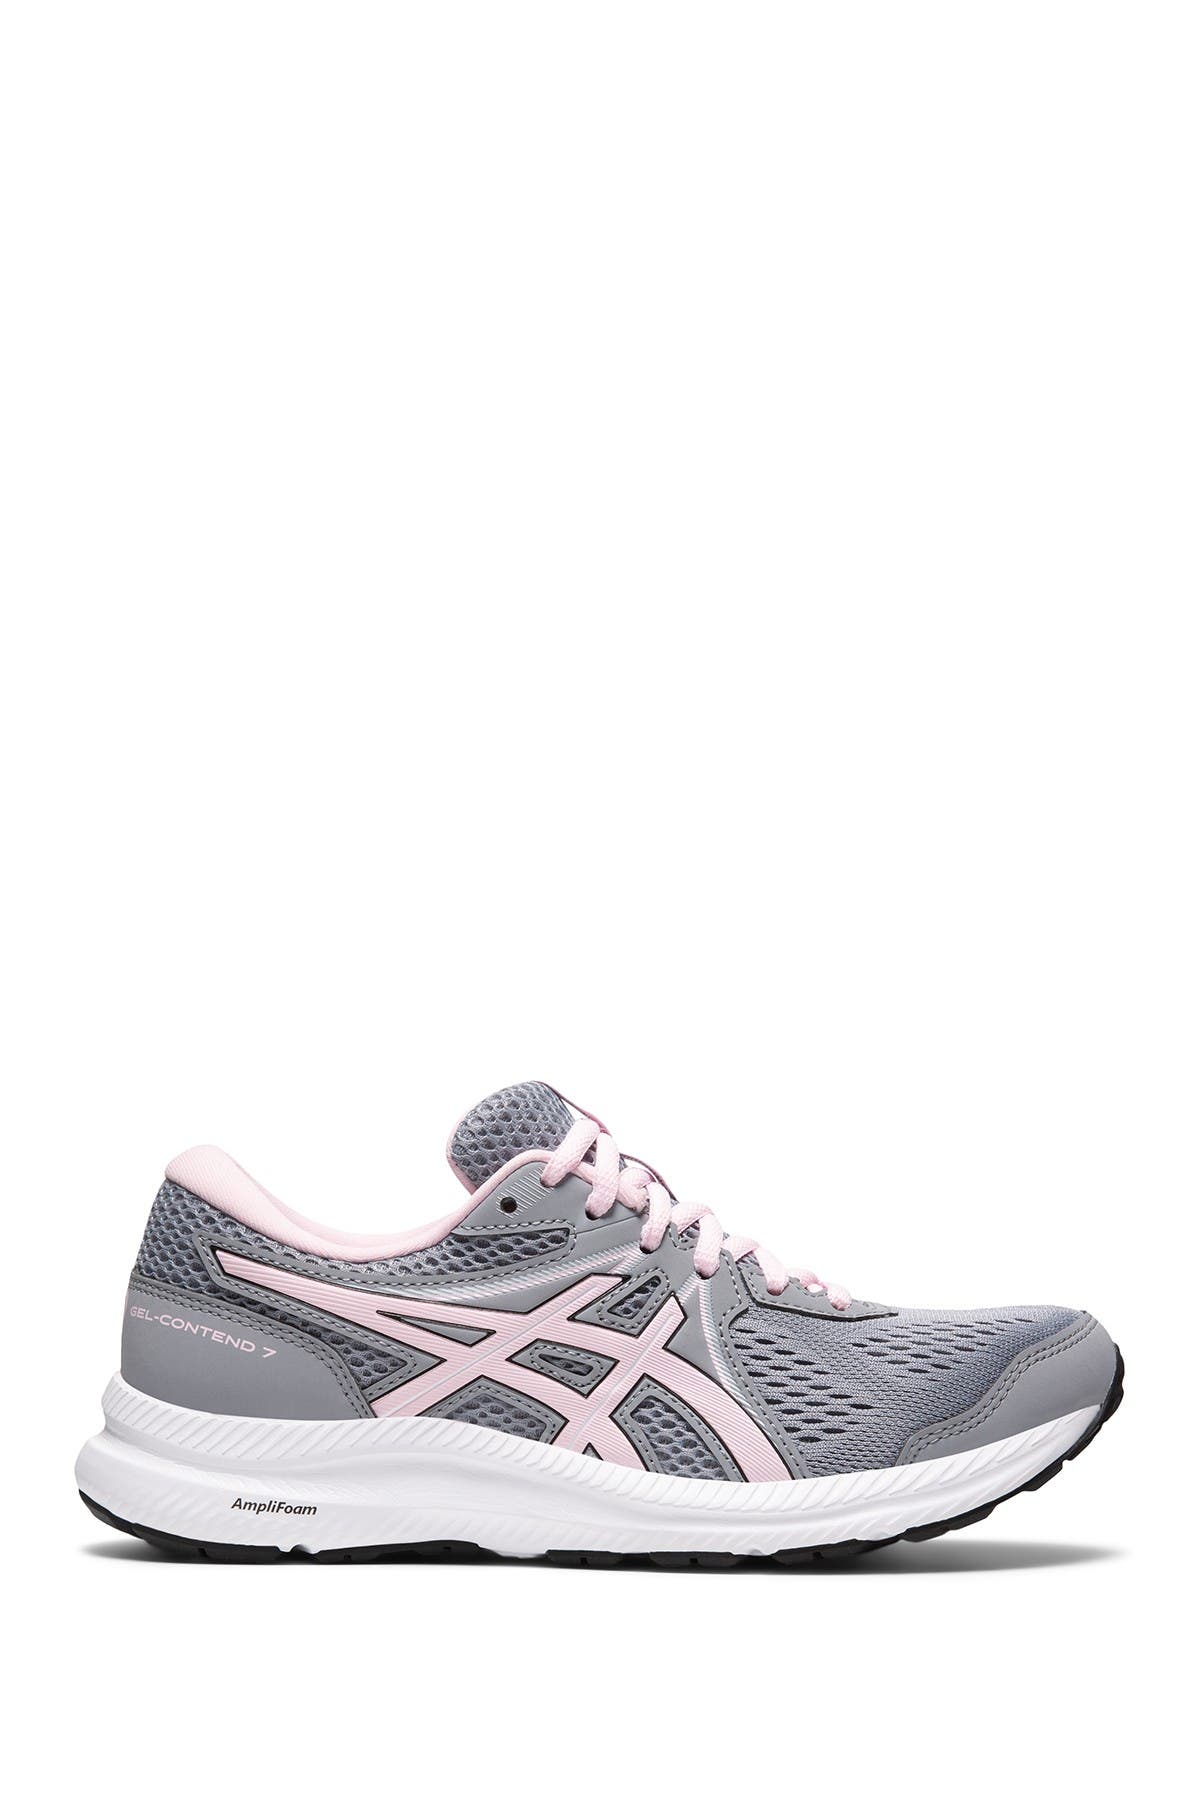 Asics Women's Gel-contend 7 Running Sneakers From Finish Line In  Grey/pink/white | ModeSens